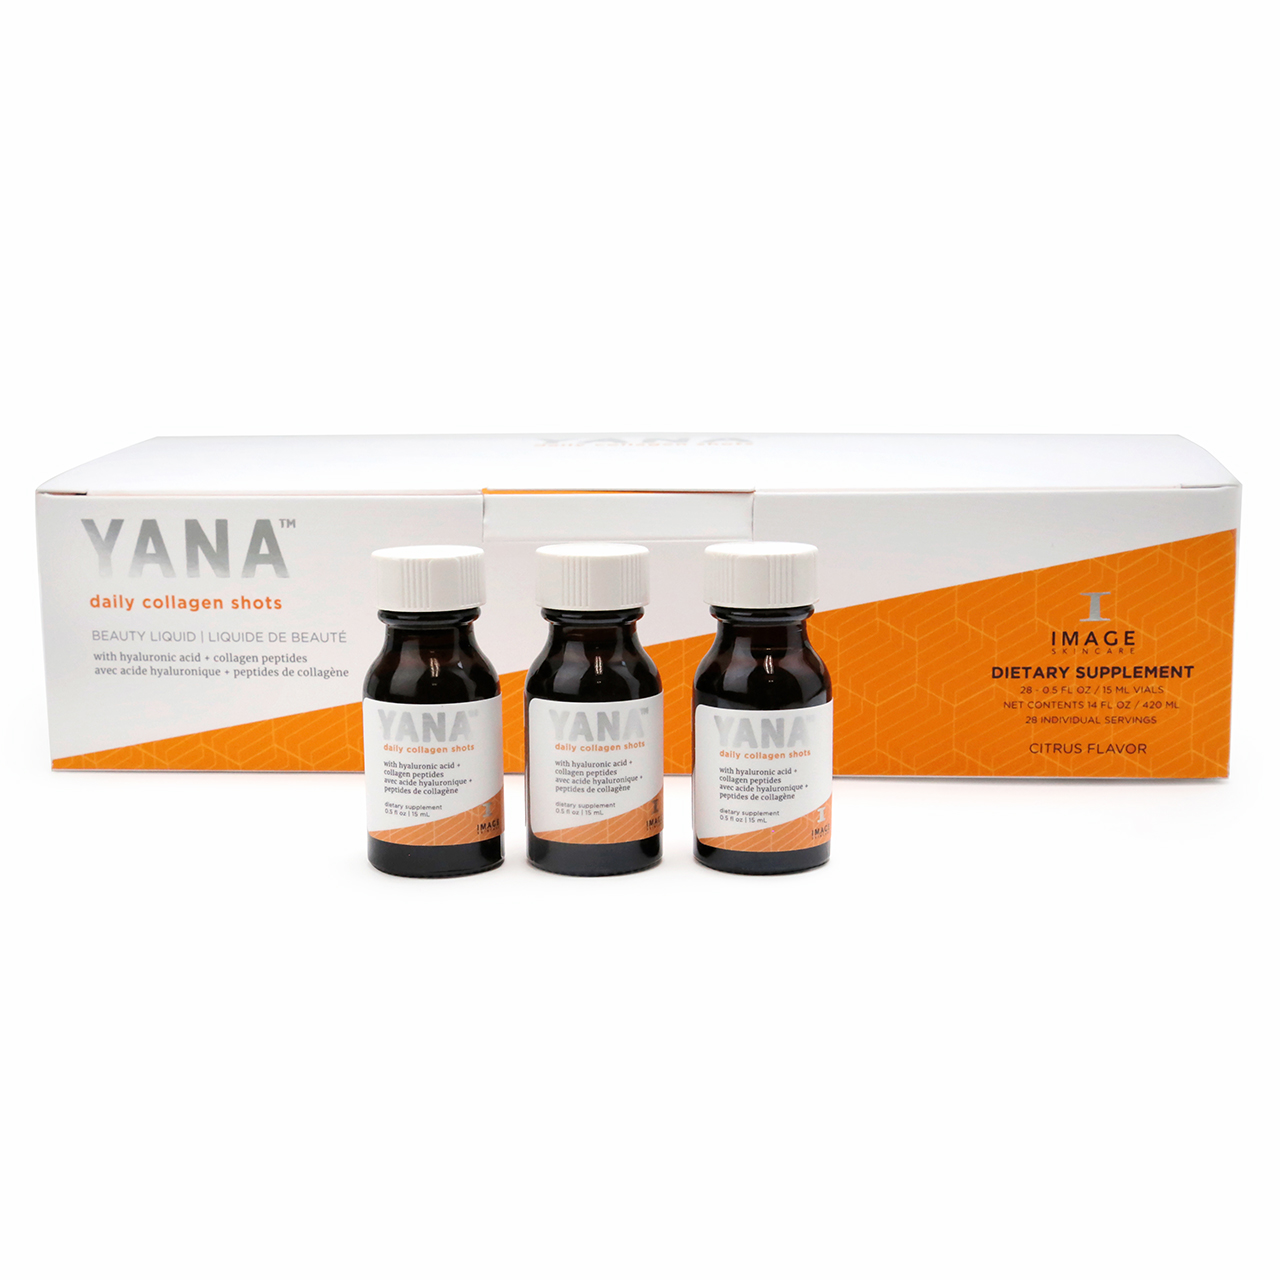 Image Skincare YANA Daily Collagen Shots (28 Day) - 28 x 0.5 oz vials (Y-104) Exp:7/24 Questions & Answers